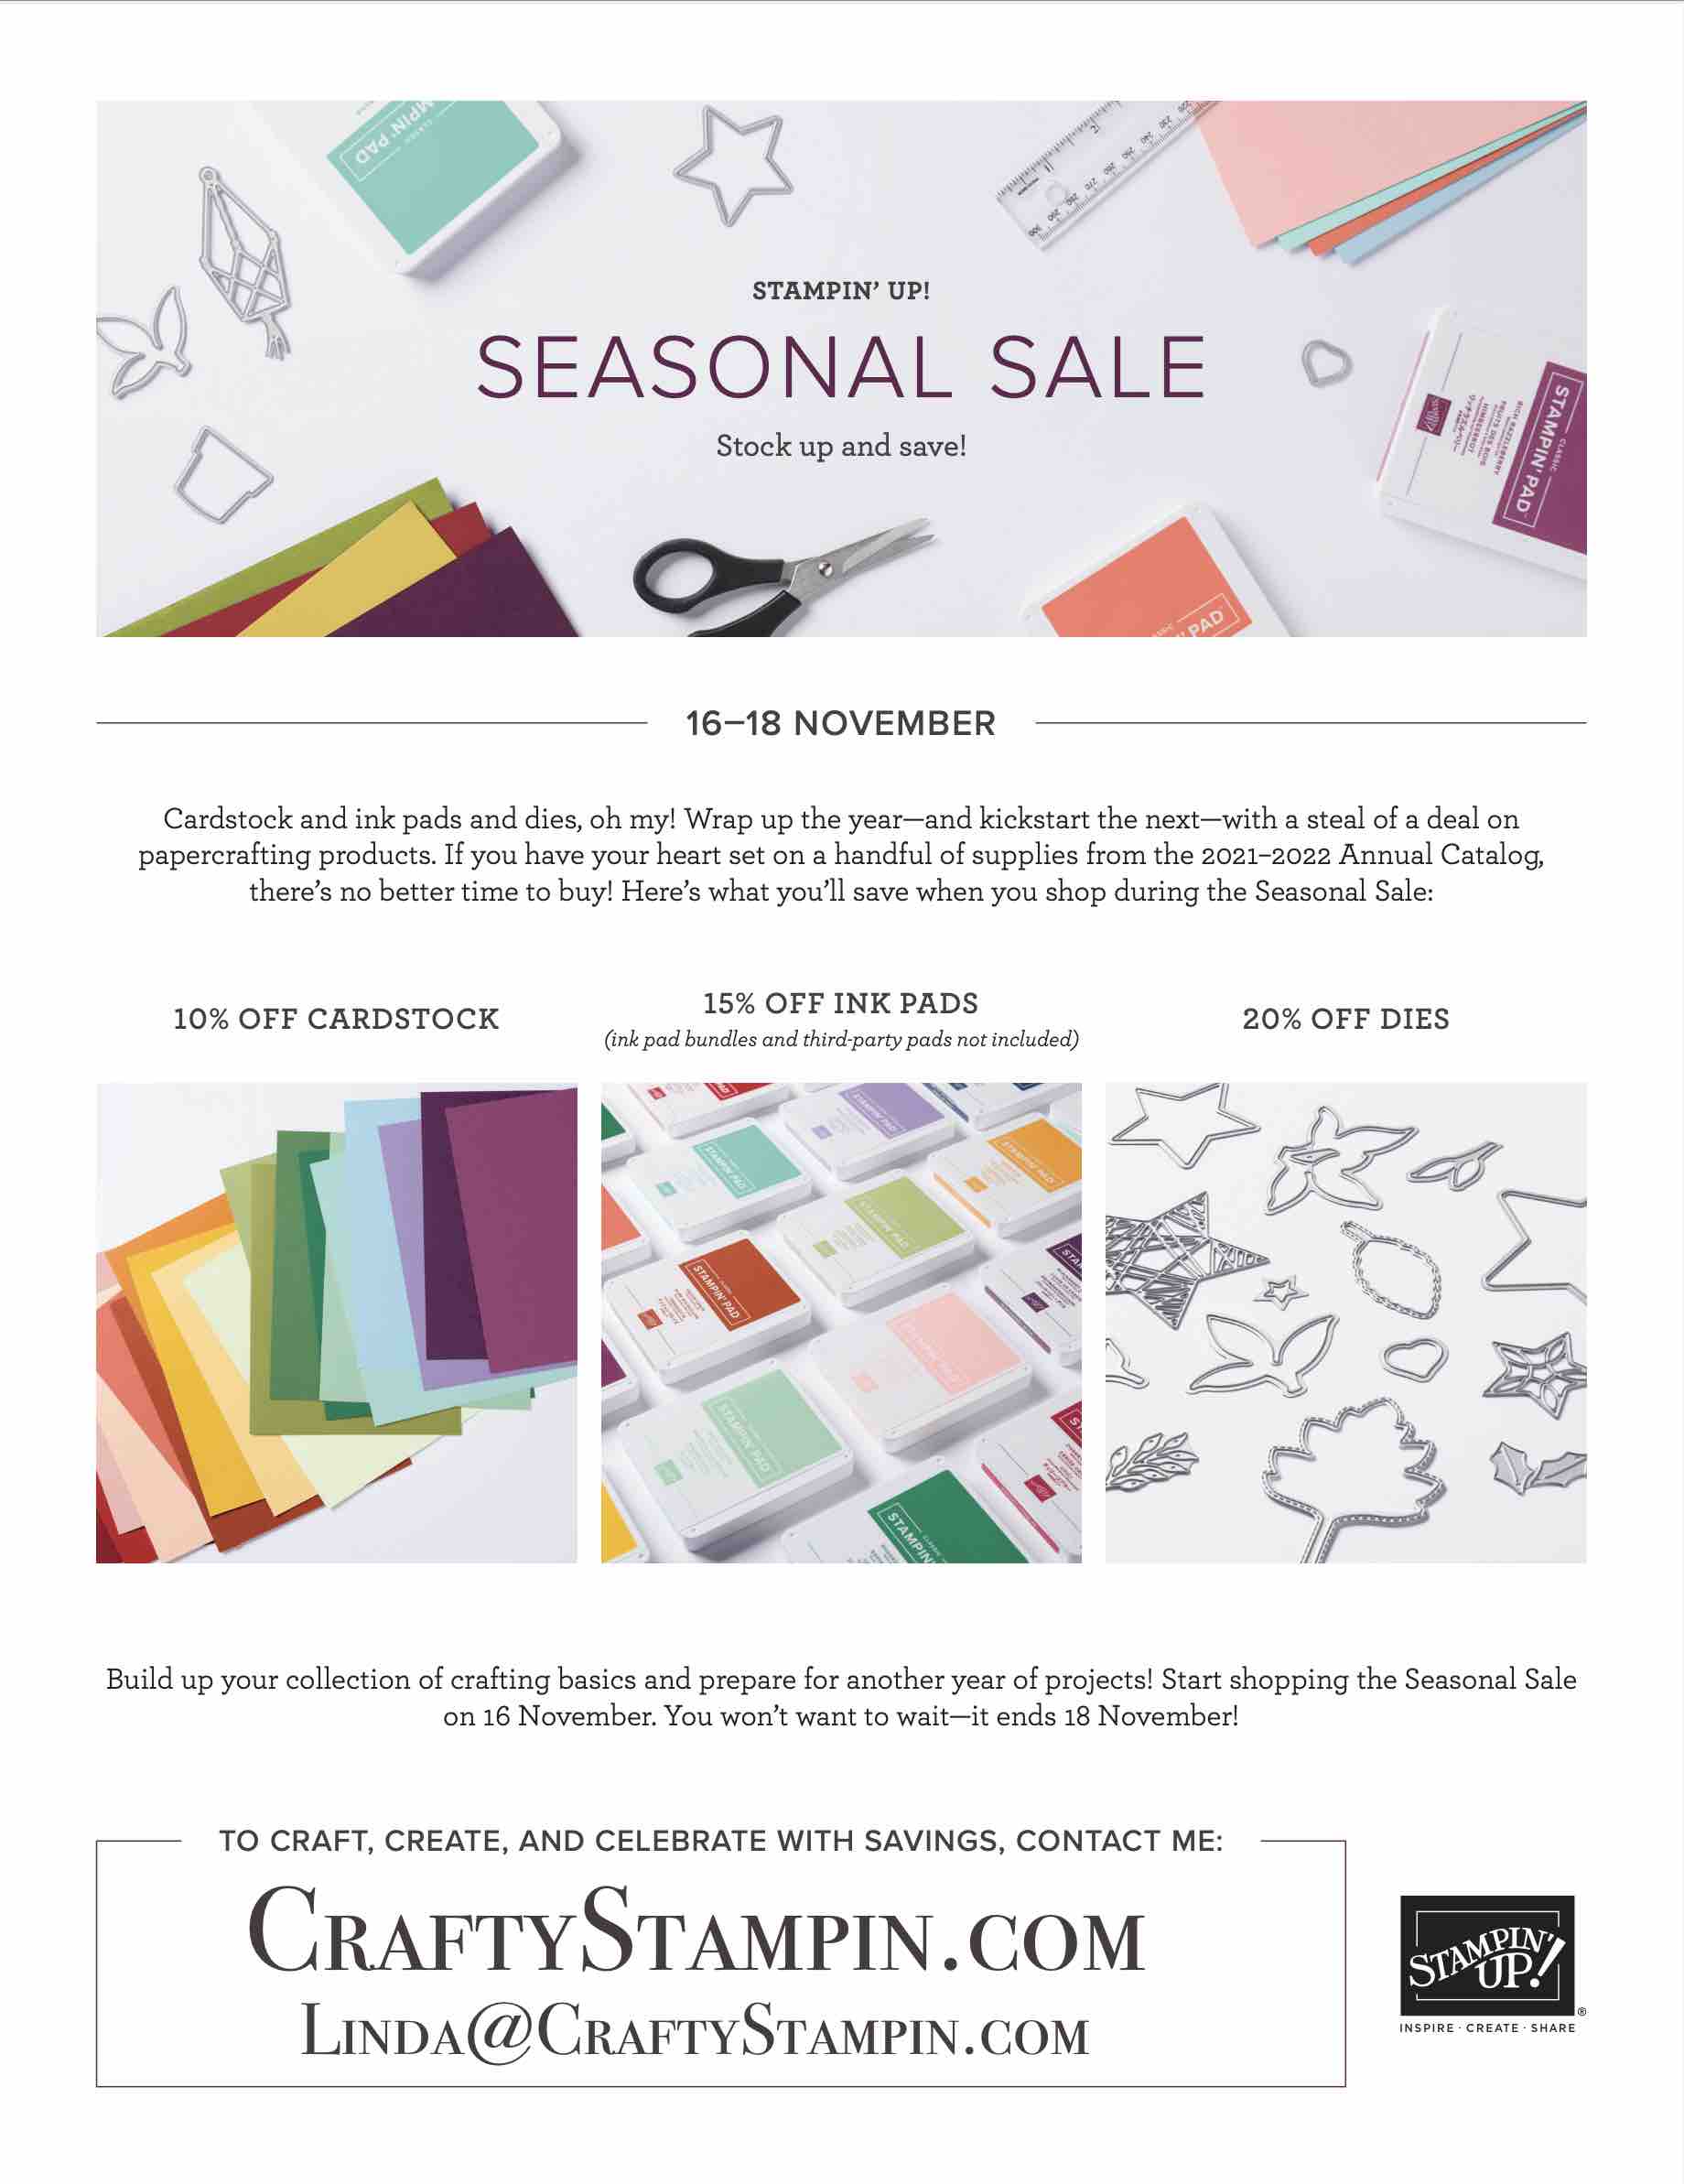 2021 Seasonal Sale | Join Stampin’ Up! | Frequently Asked Questions about becoming a Stampin’ Up! Demonstrator | Join the Craft Stampin’ Crew | Stampin Up Demonstrator Linda Cullen | Crafty Stampin’ | Purchase Stampin’ Up! Product | FAQ about Paper Pumpkin Cardstock | Ink | Dies